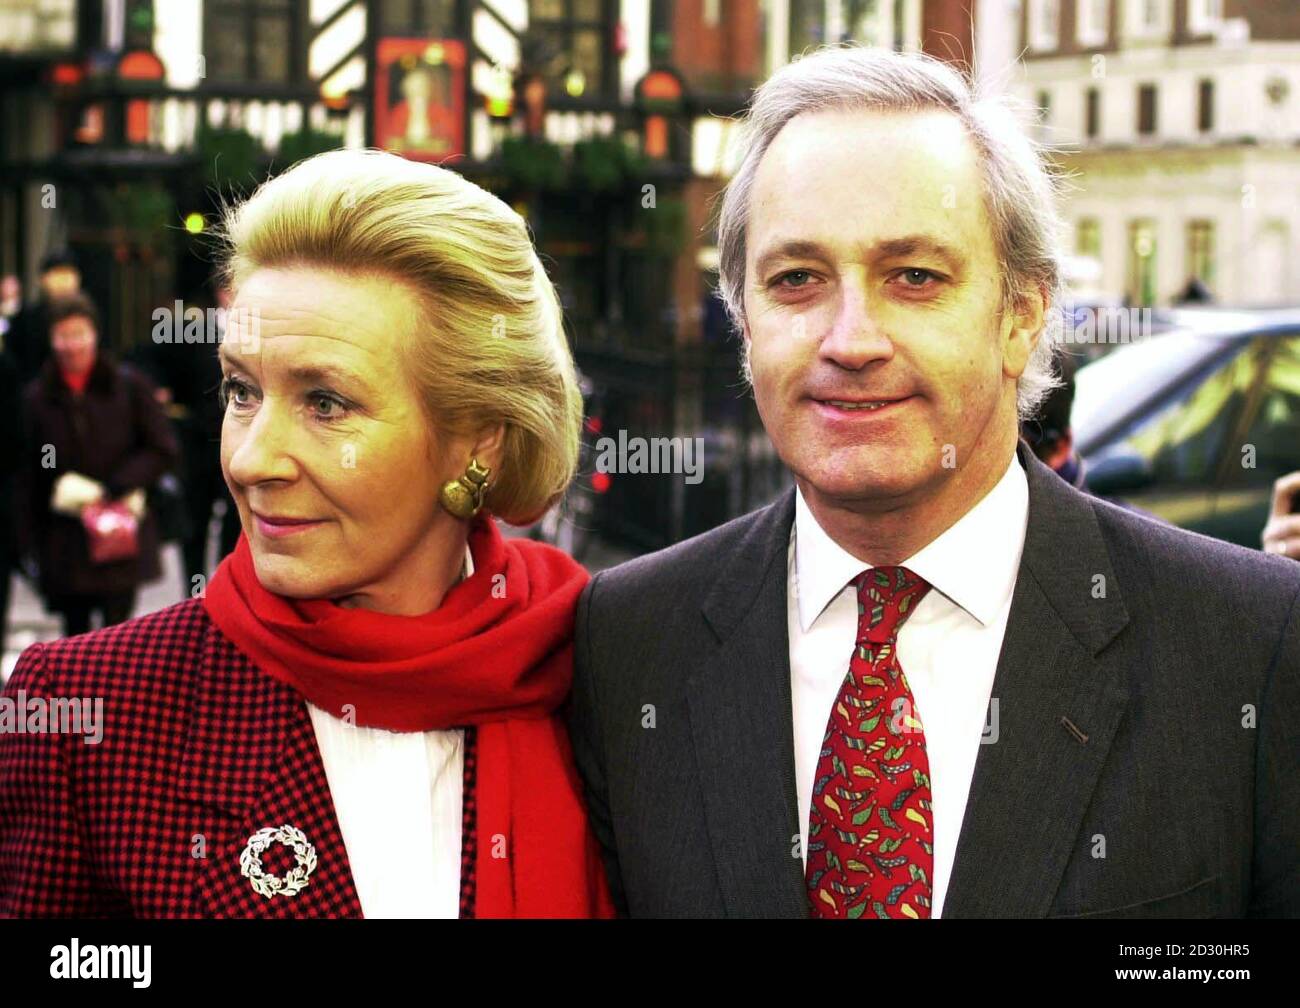 Former Tory MP Neil Hamilton and his wife Christine, arrive at the High Court, in central London,  in the continuing  cash for questions libel action against Harrods boss Mohammed Al Fayed which is entering its final stage.   *160503*Today, Friday May 16, 2003, Nadine Milroy-Sloan, 29, from Grimsby, Lincolnshire, was convicted on two counts of perverting the course of justice relating to allegations that she falsely claimed she had been raped and sexually assaulted by former Tory MP Neil Hamilton and his wife Christine. Stock Photo